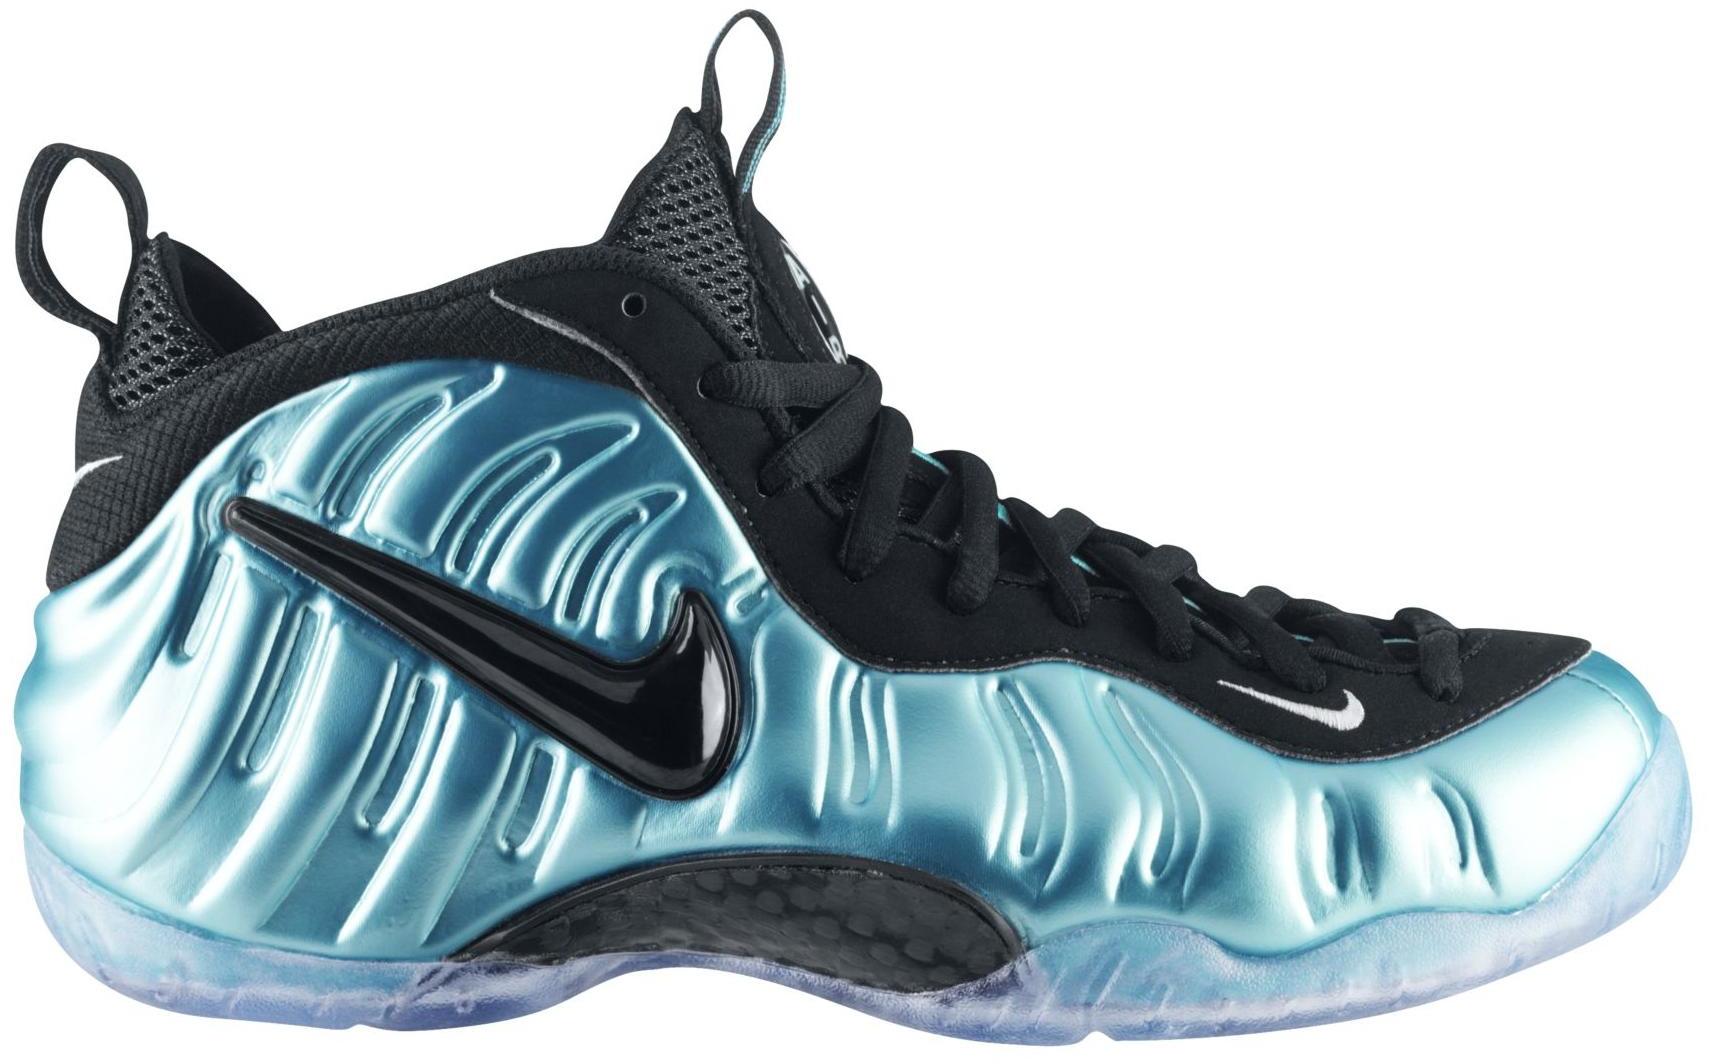 black and turquoise foamposites